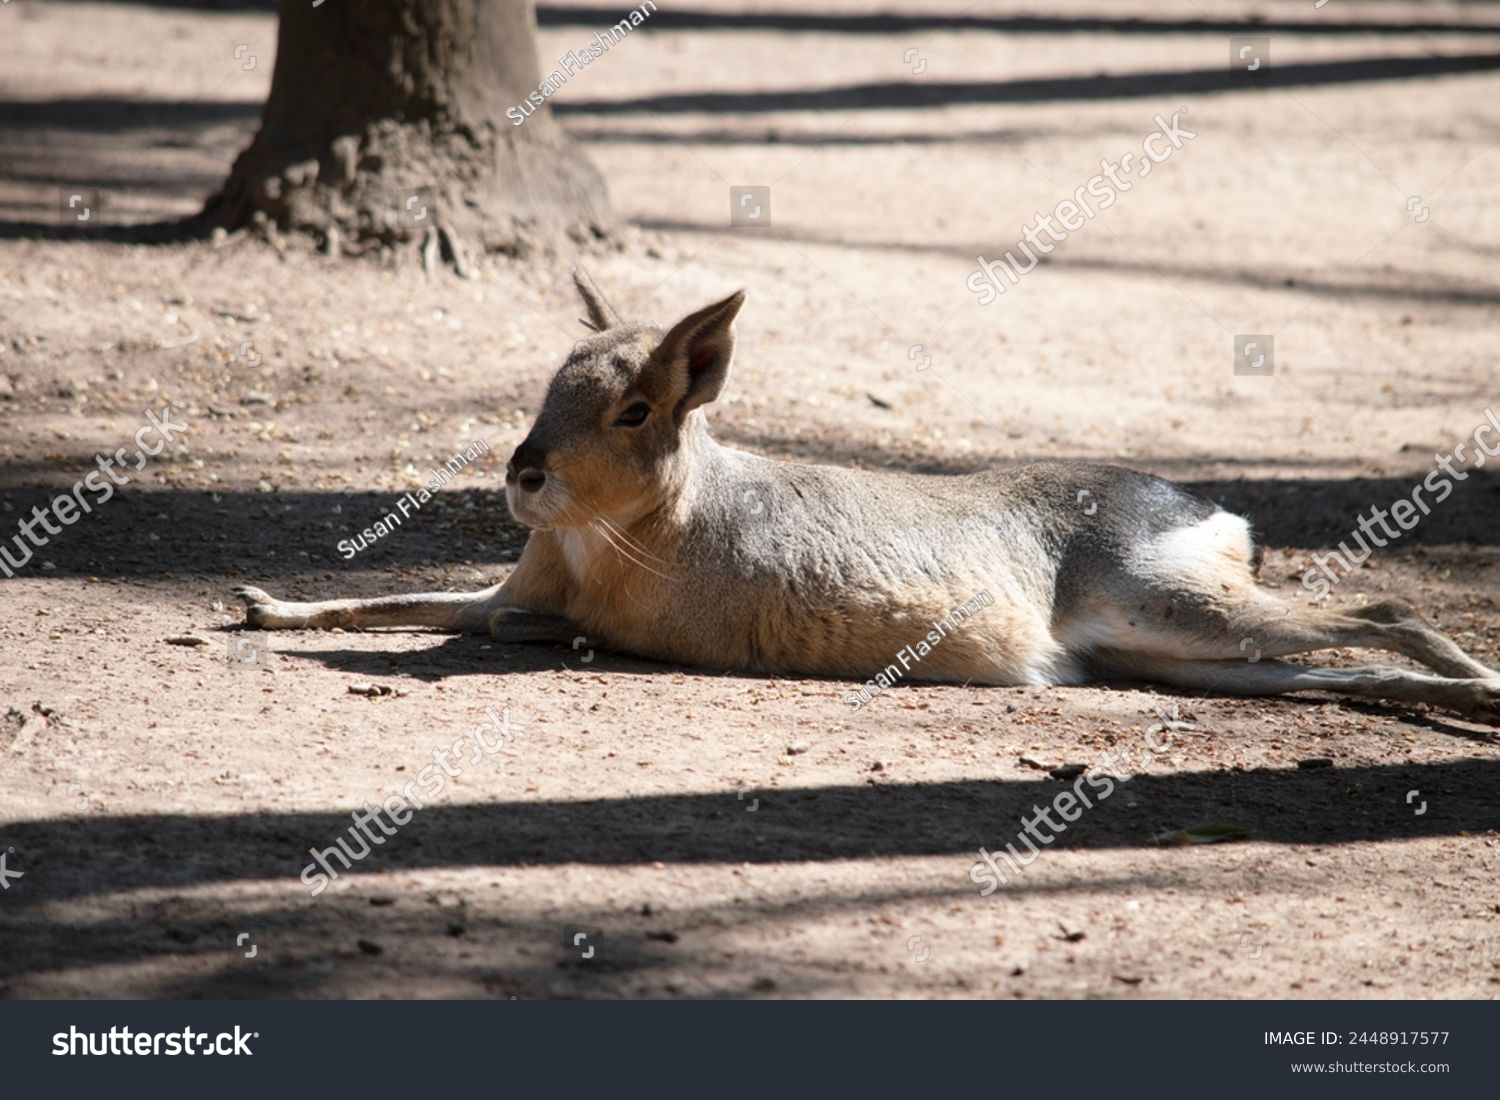 Patagonian hare, is a large rodent species that can be found in central and southern Argentina. The Patagonian cavy has long legs that allow it to reach speeds upwards of 20-25 mph #2448917577